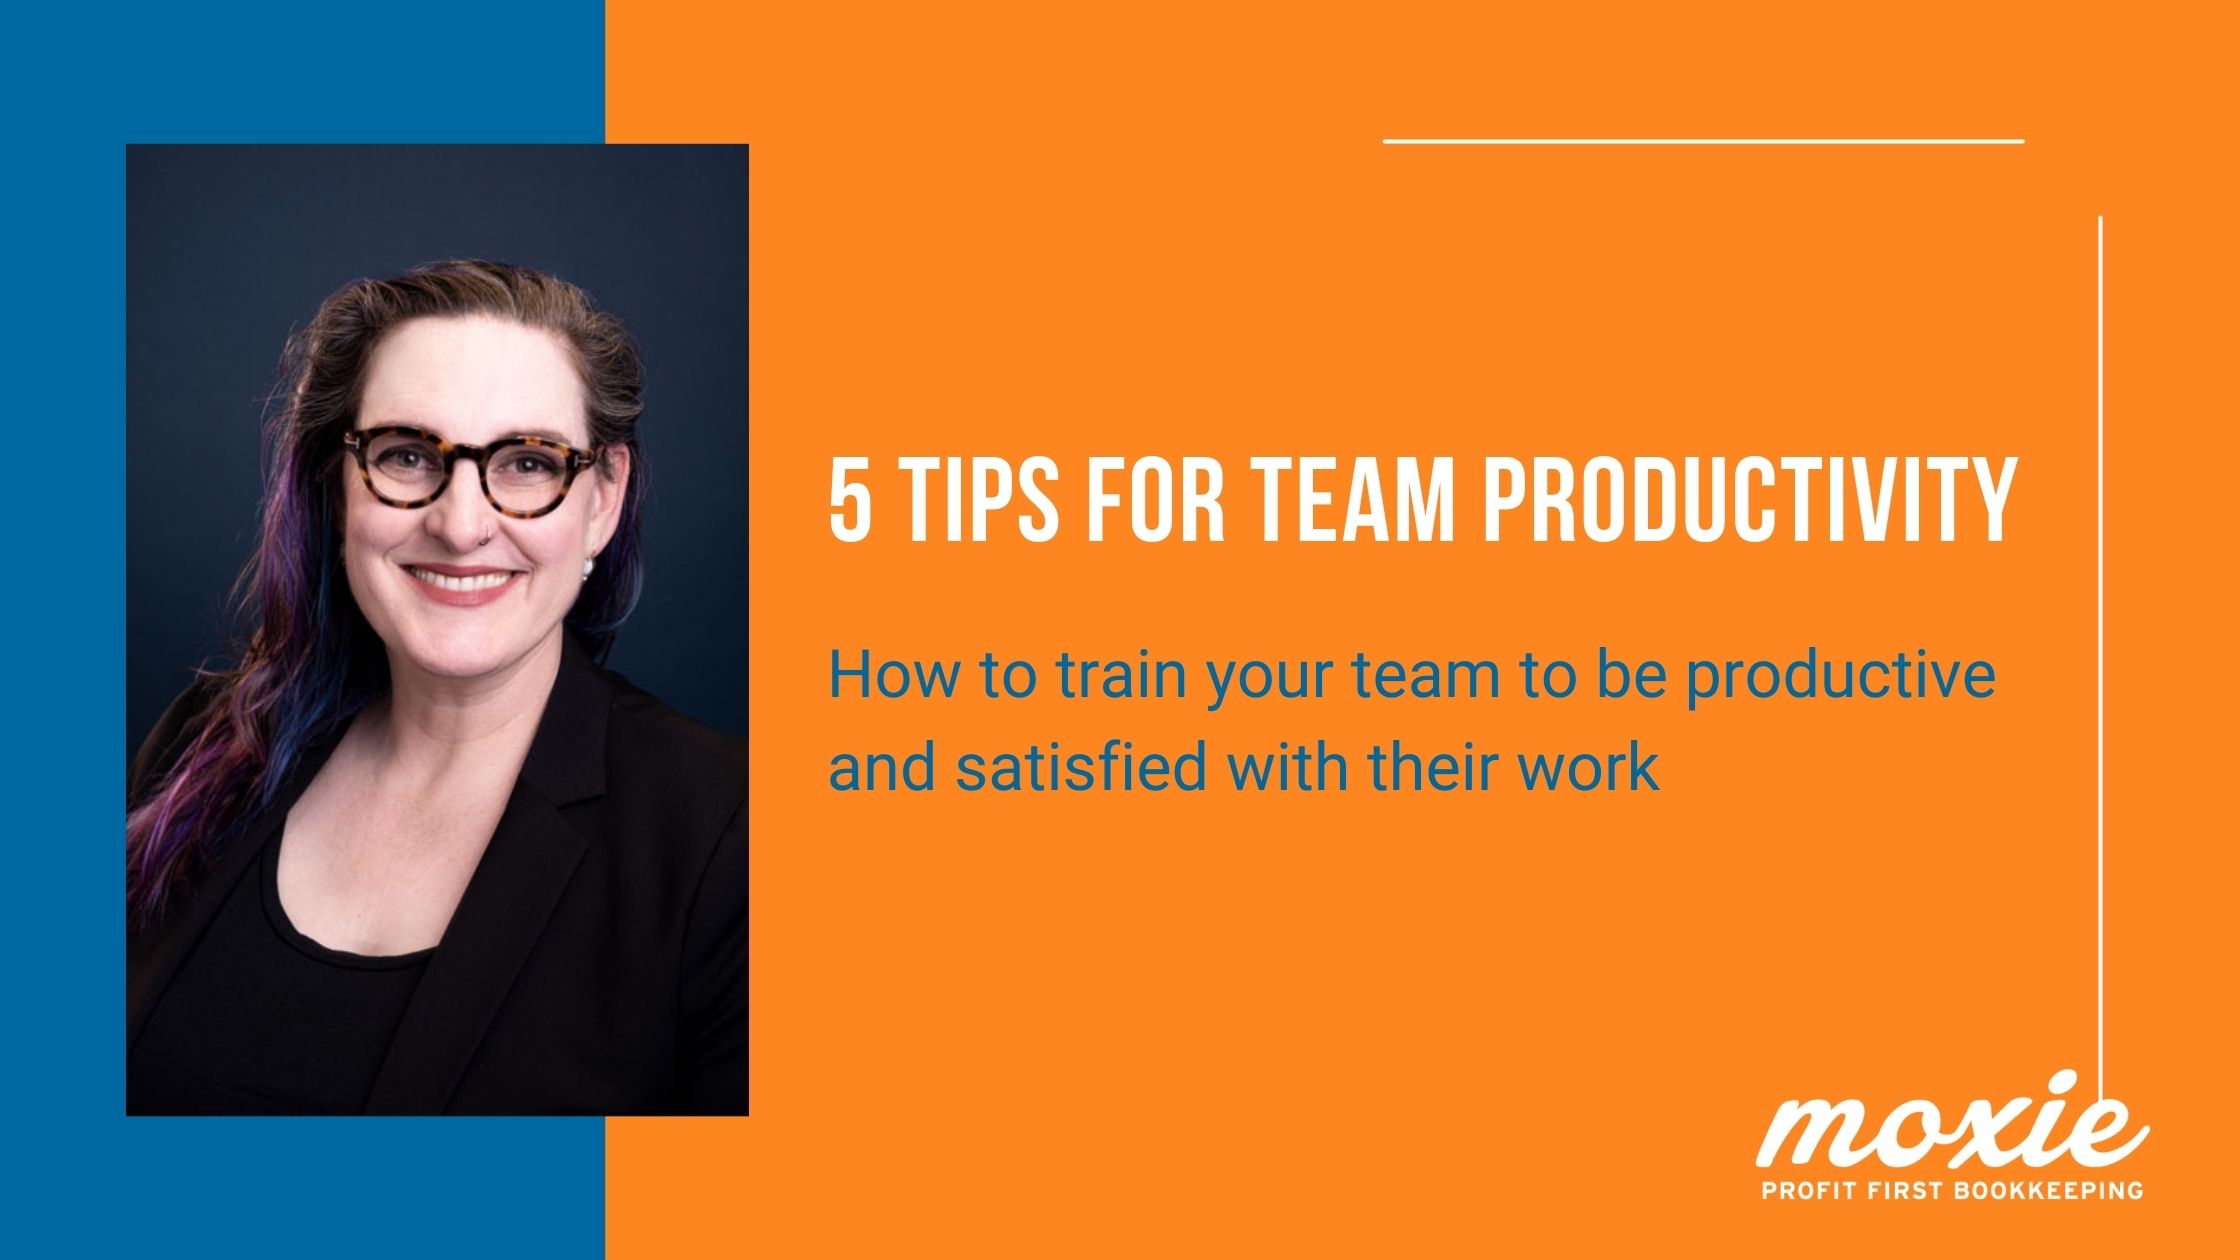 5 tips for team productivity | how to train your team on being effective team members | Moxie bookkeeping and profit first consulting